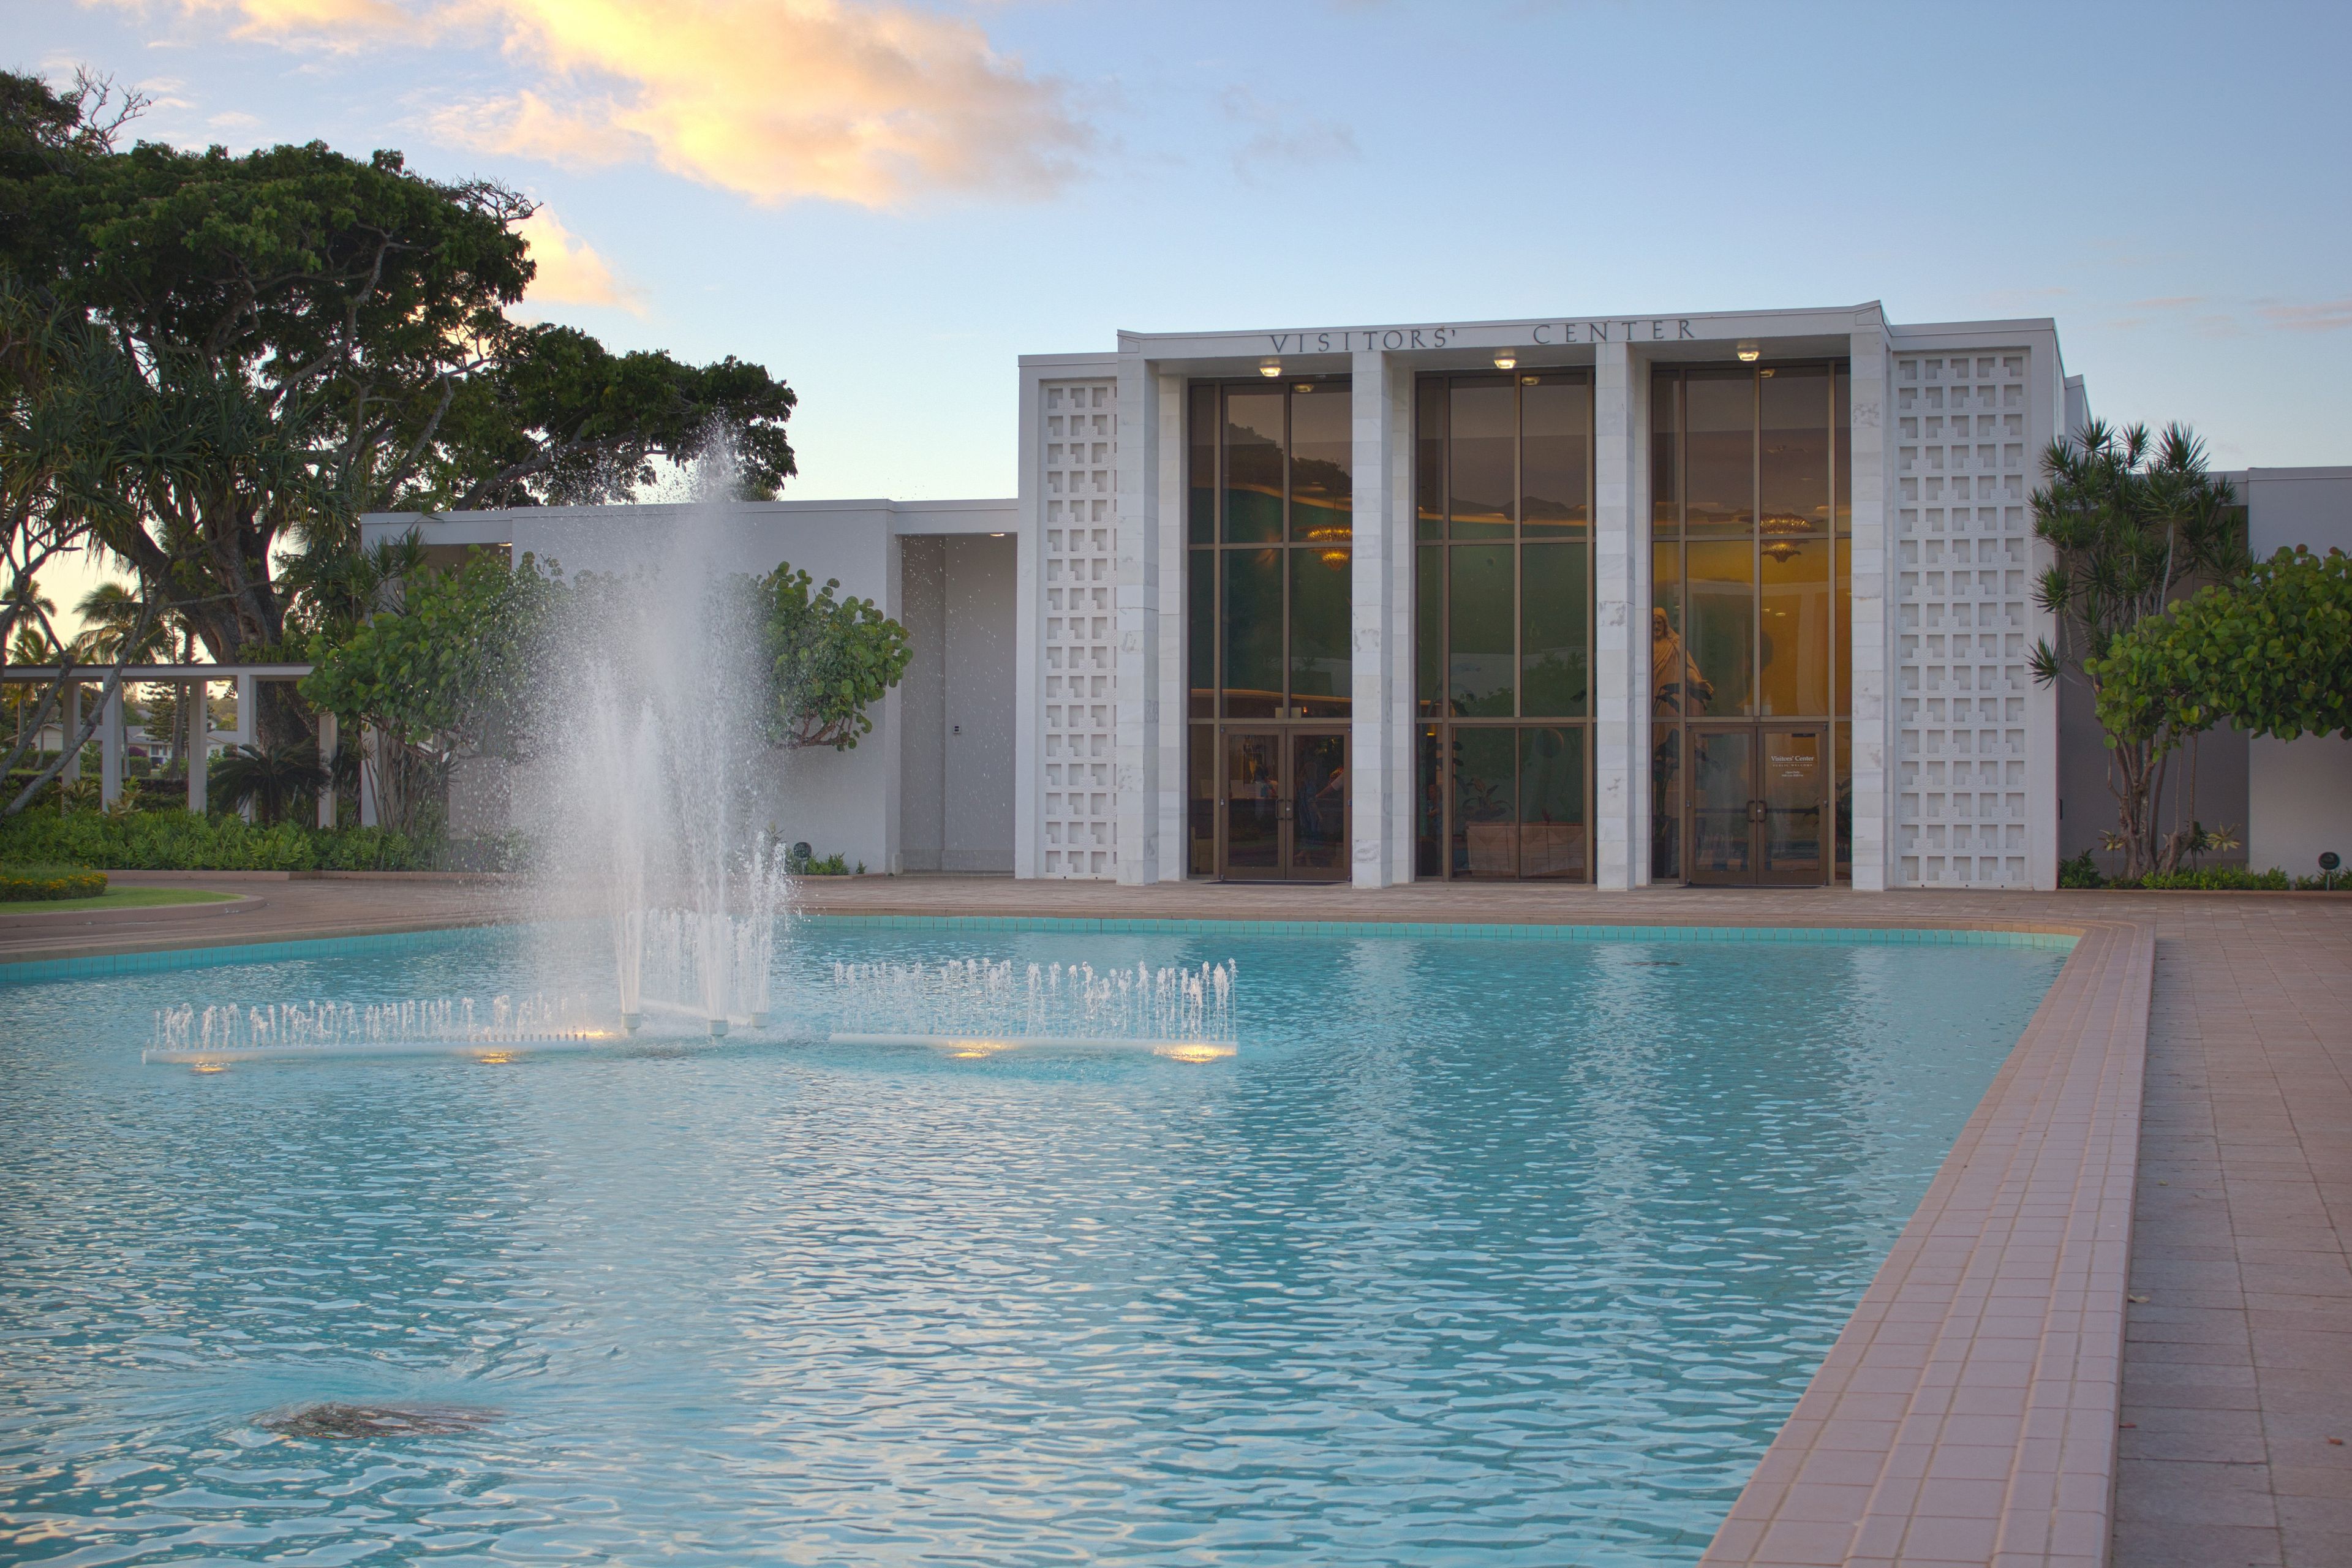 The Laie Hawaii Temple Visitors’ Center, with the fountain in front.